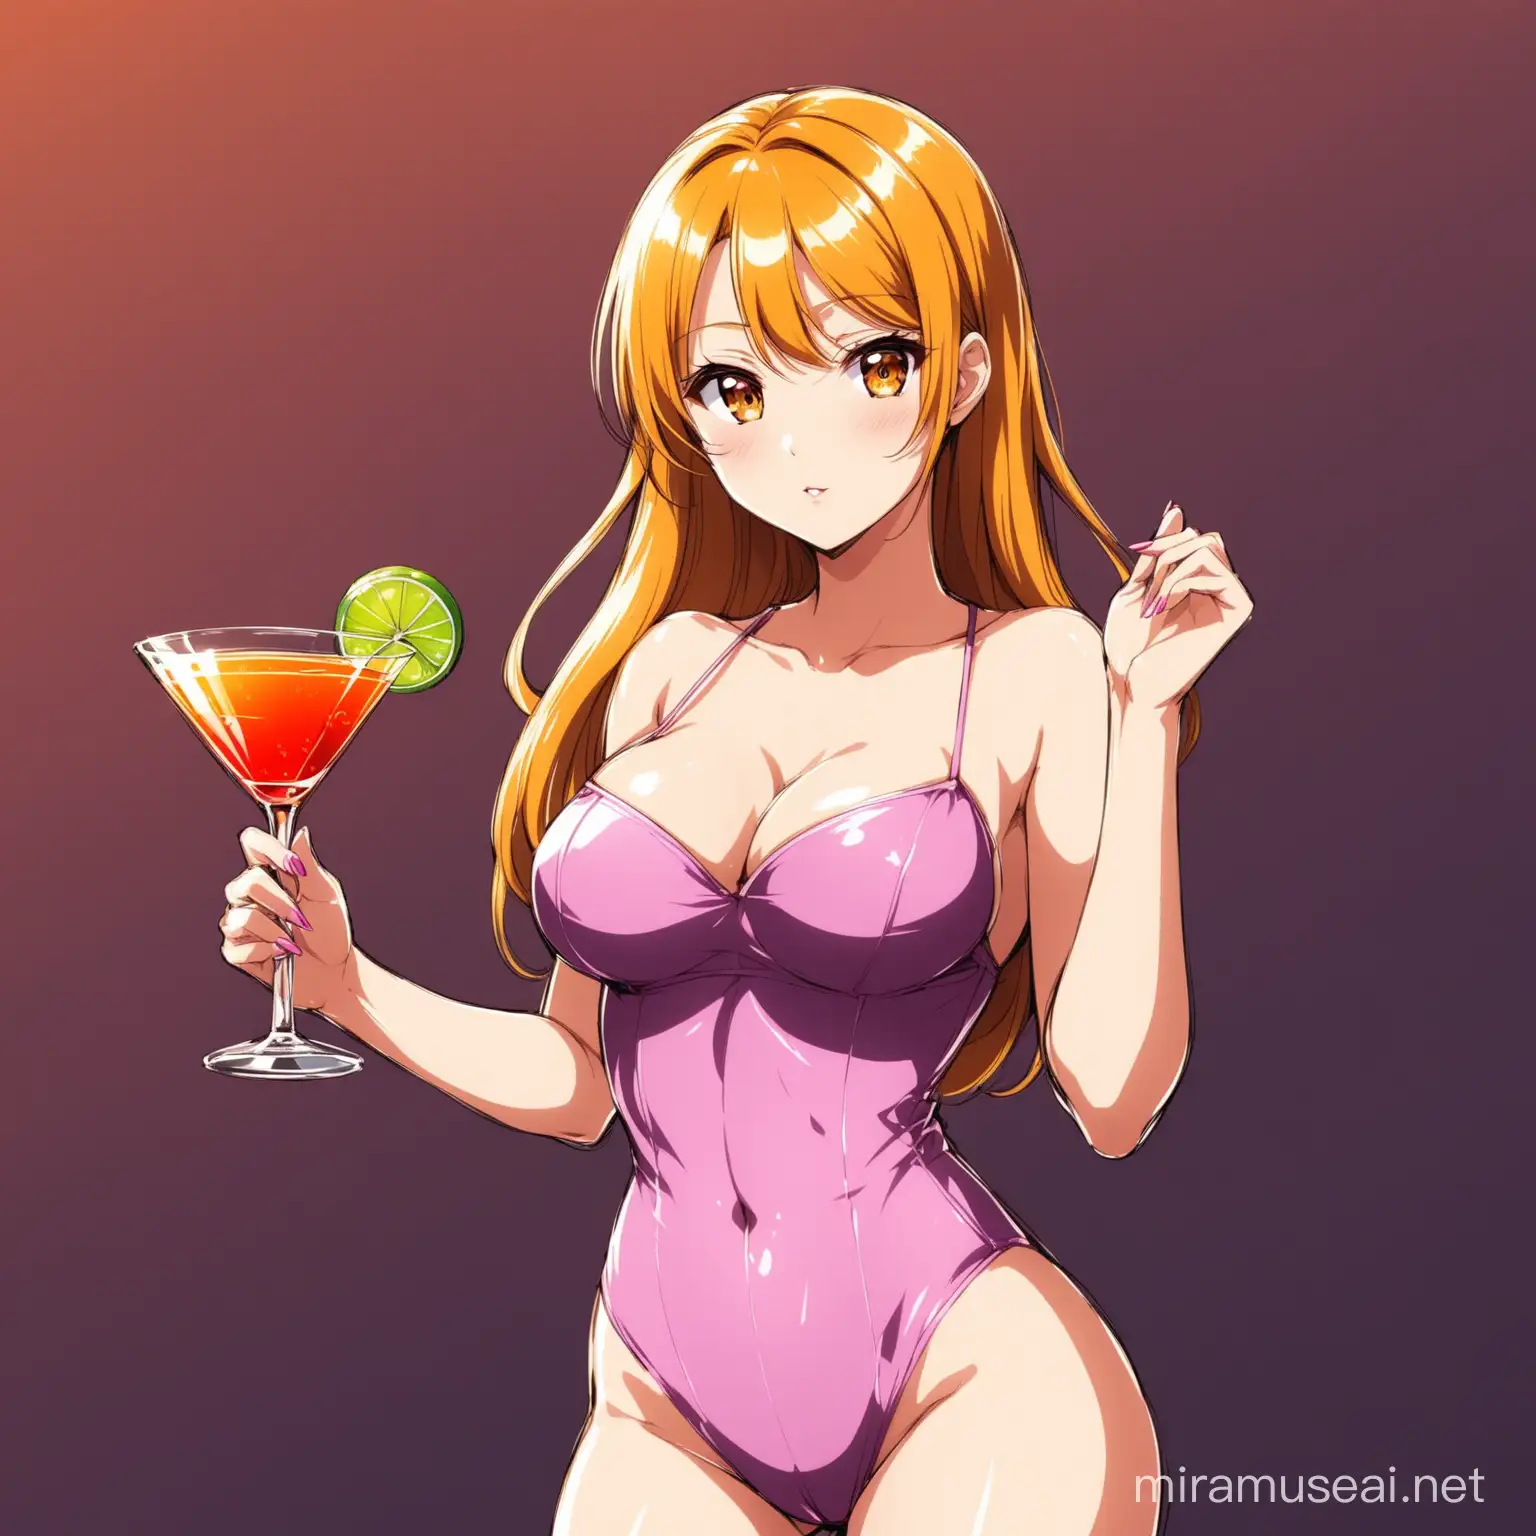 A young girl with a sexy body is holding a glass with a cocktail in anime style